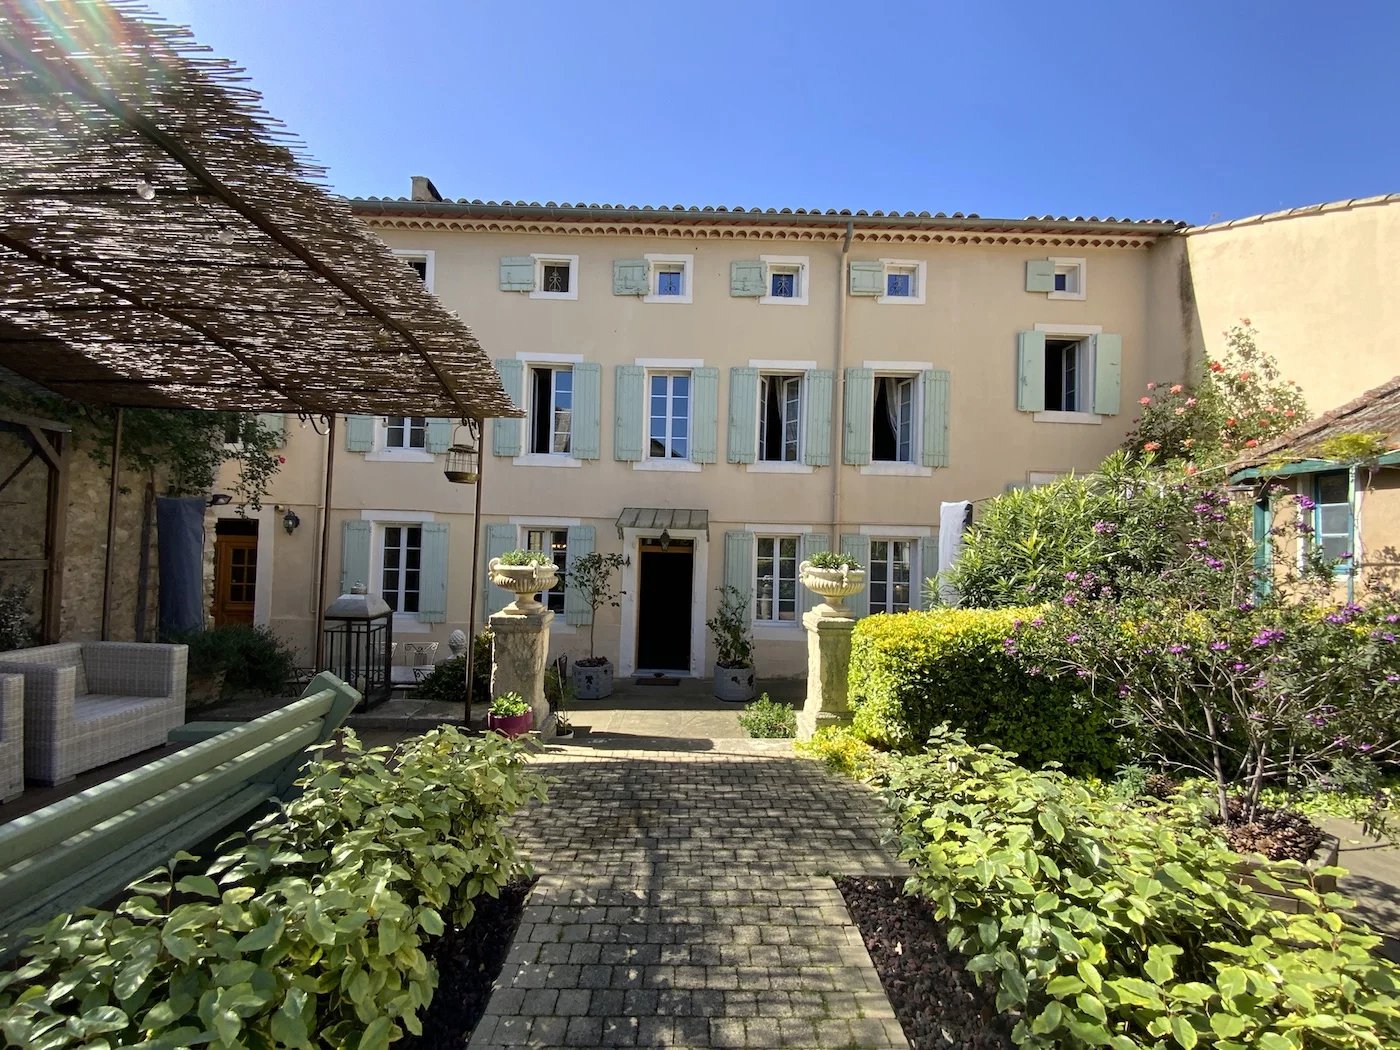 Sale Bed and breakfast - Narbonne